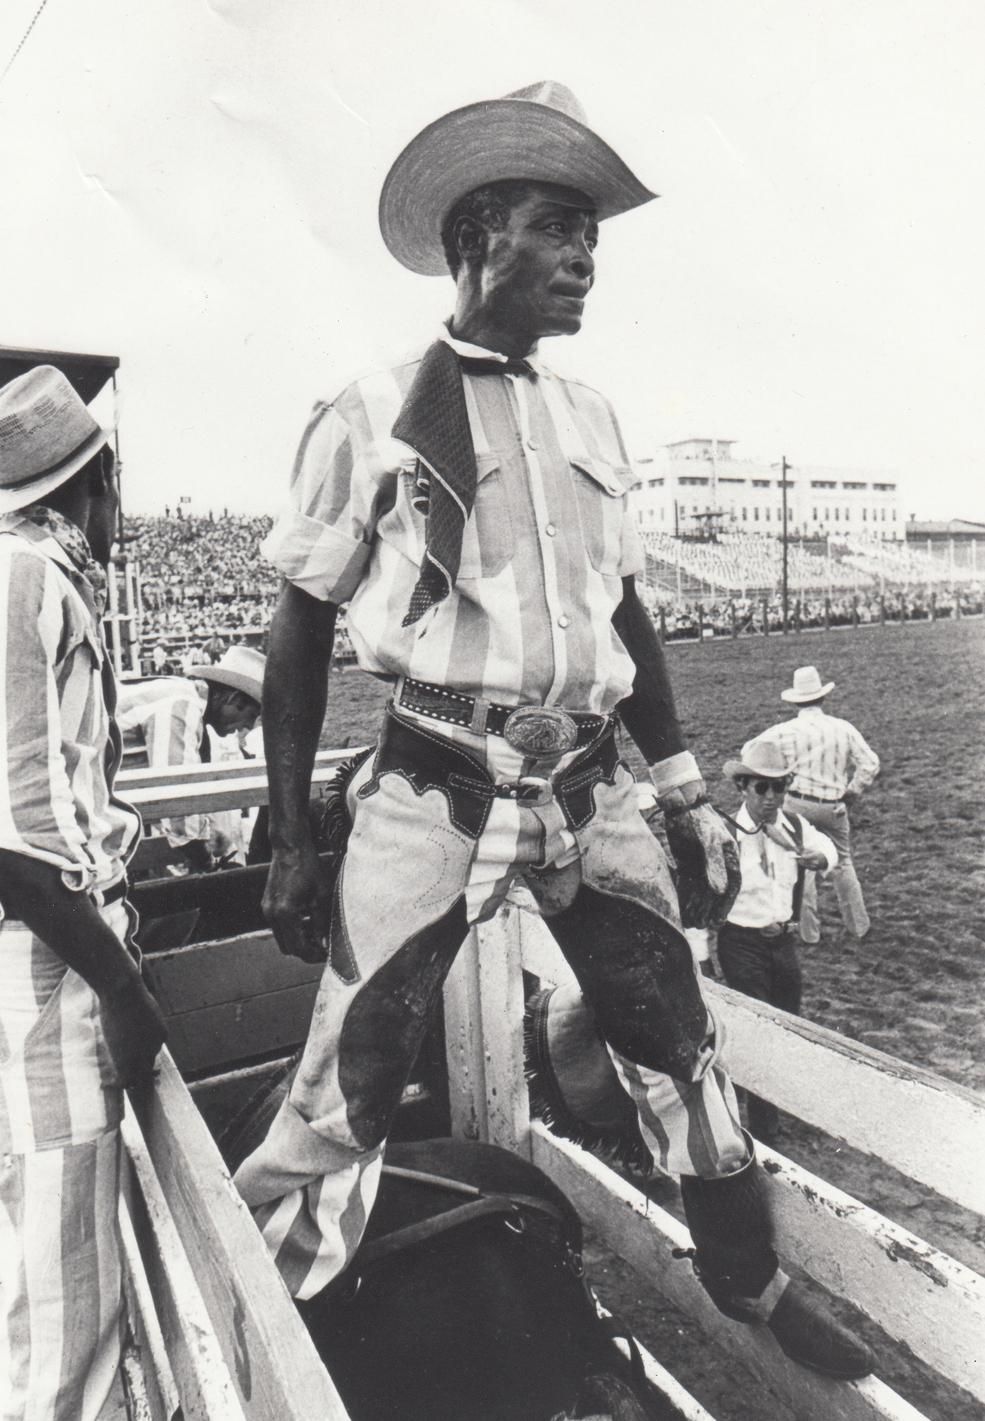 Willie Craig was 56 years old when he won the Top Hand Buckle in 1976.